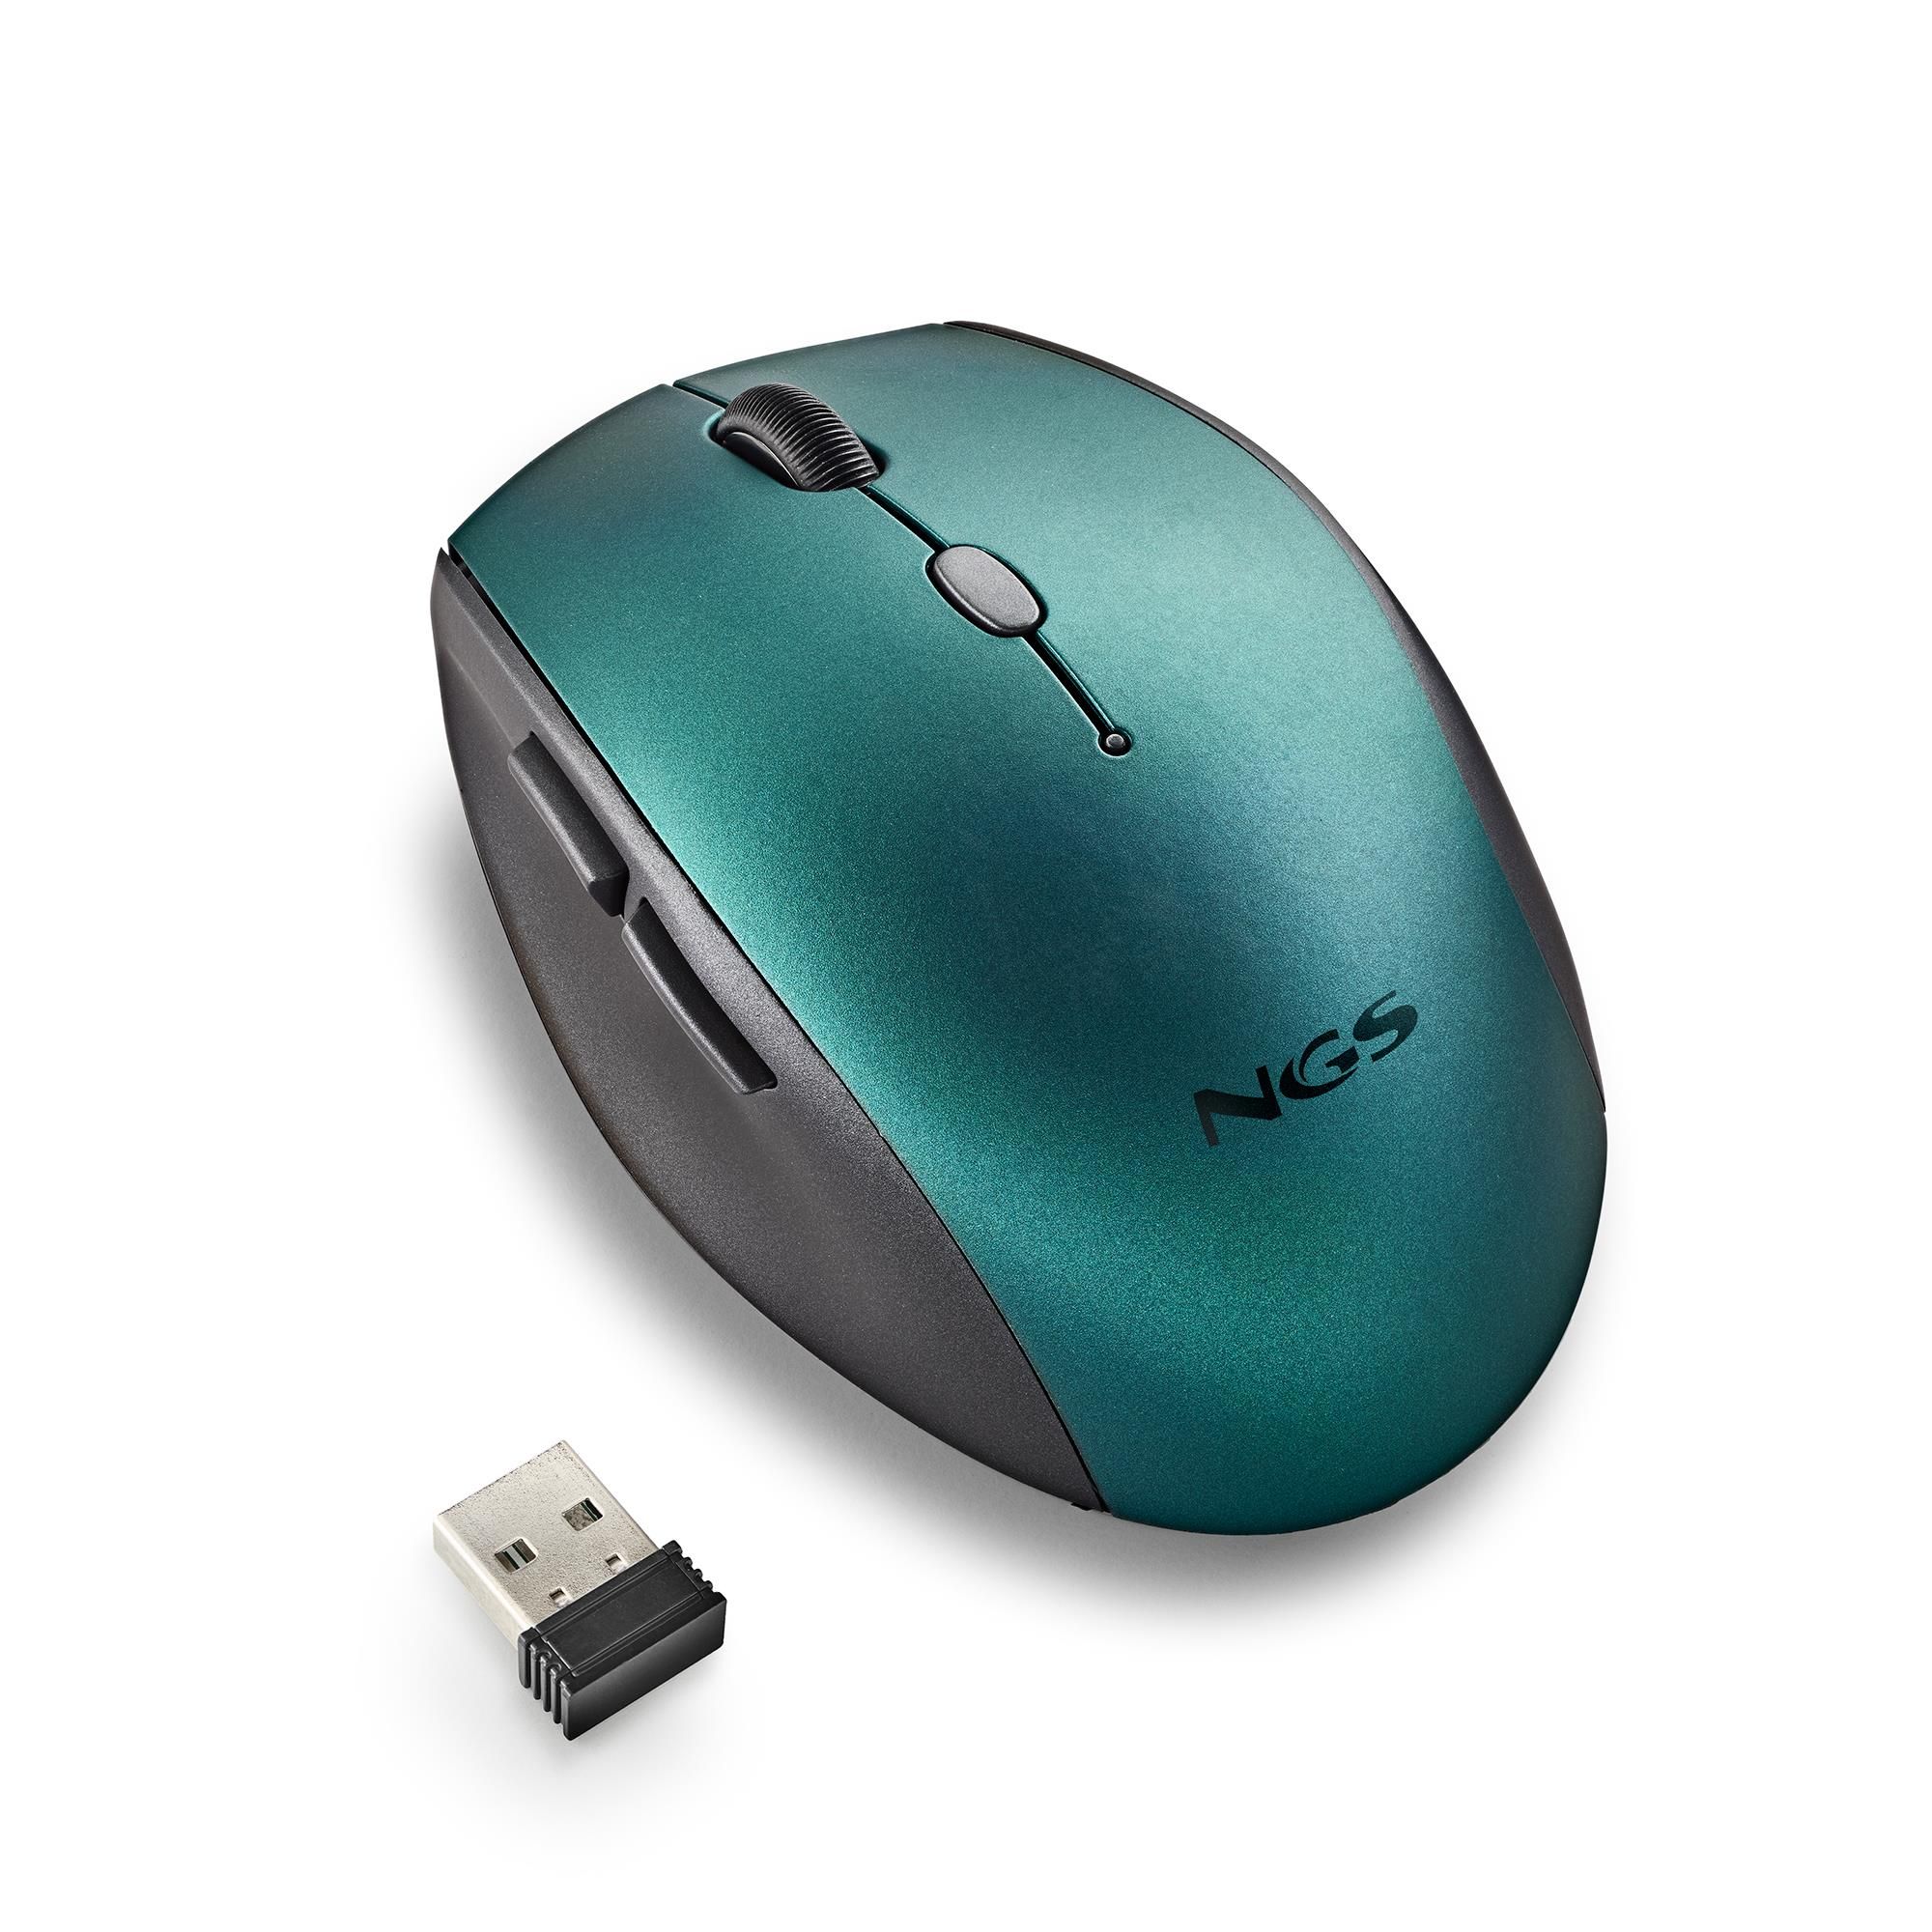 NGS-MOUSE-1229 Foto: 3